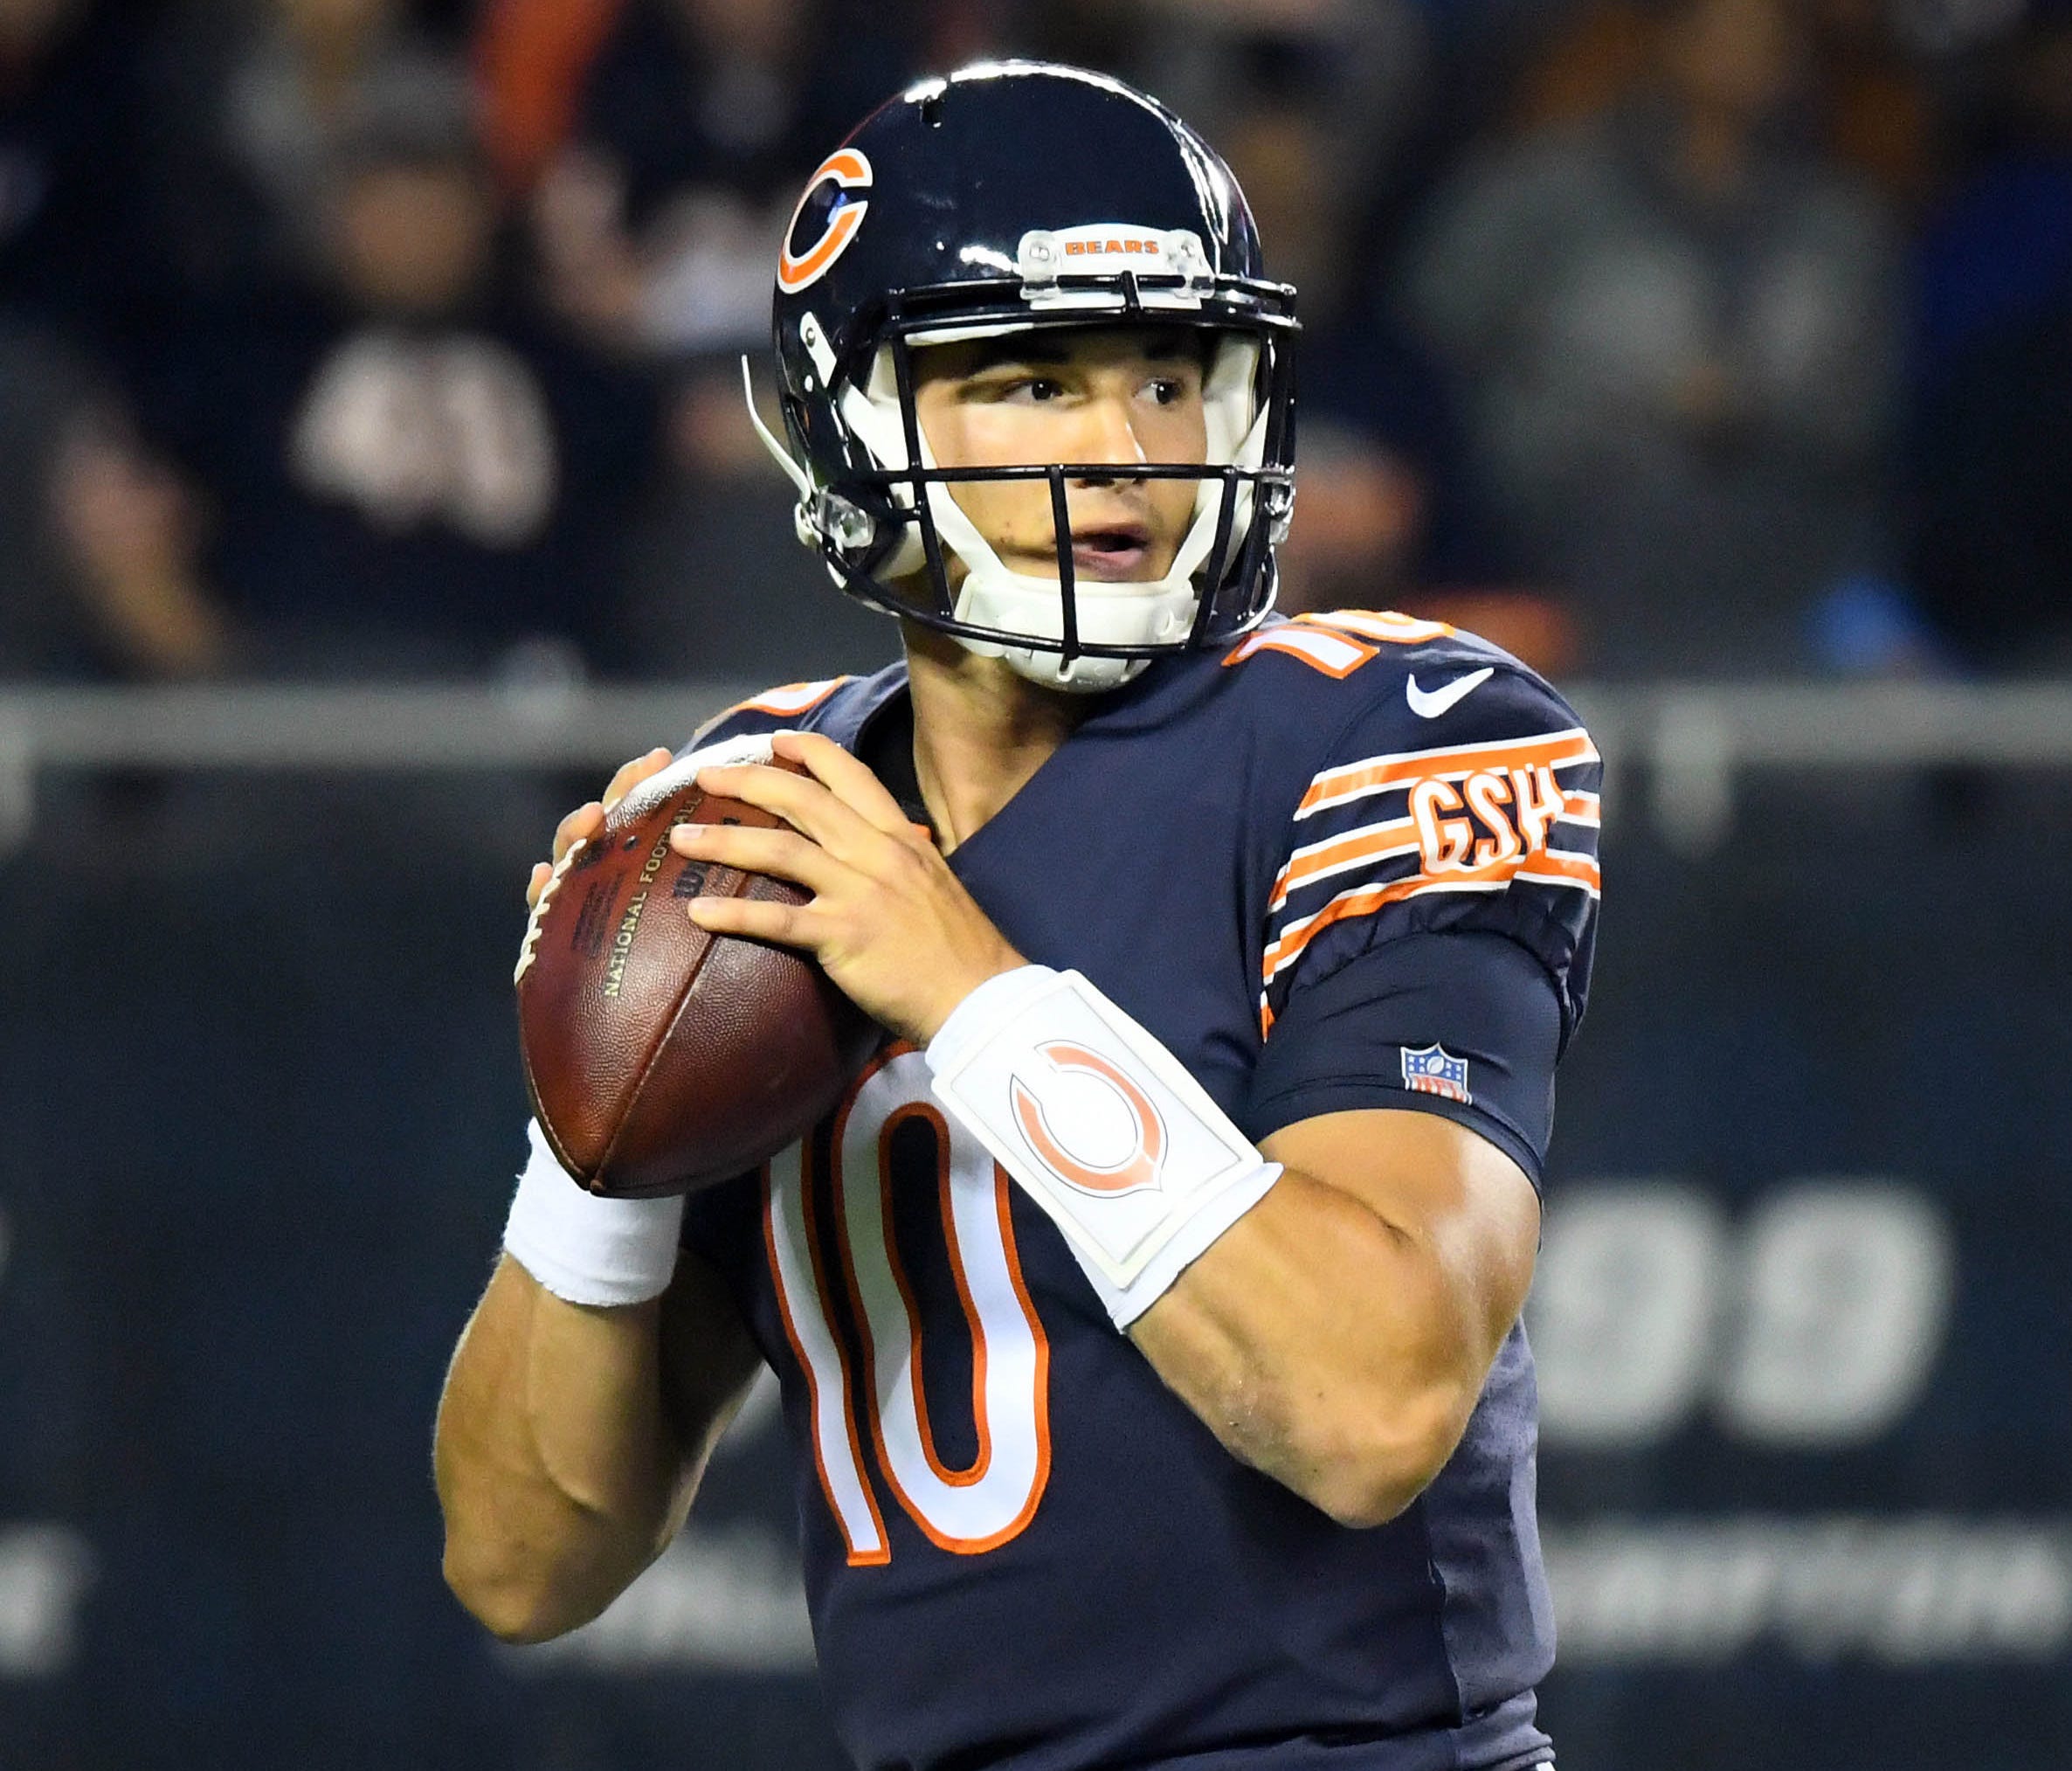 Mitchell Trubisky will reportedly get the starting nod vs. the Vikings in Week 5.